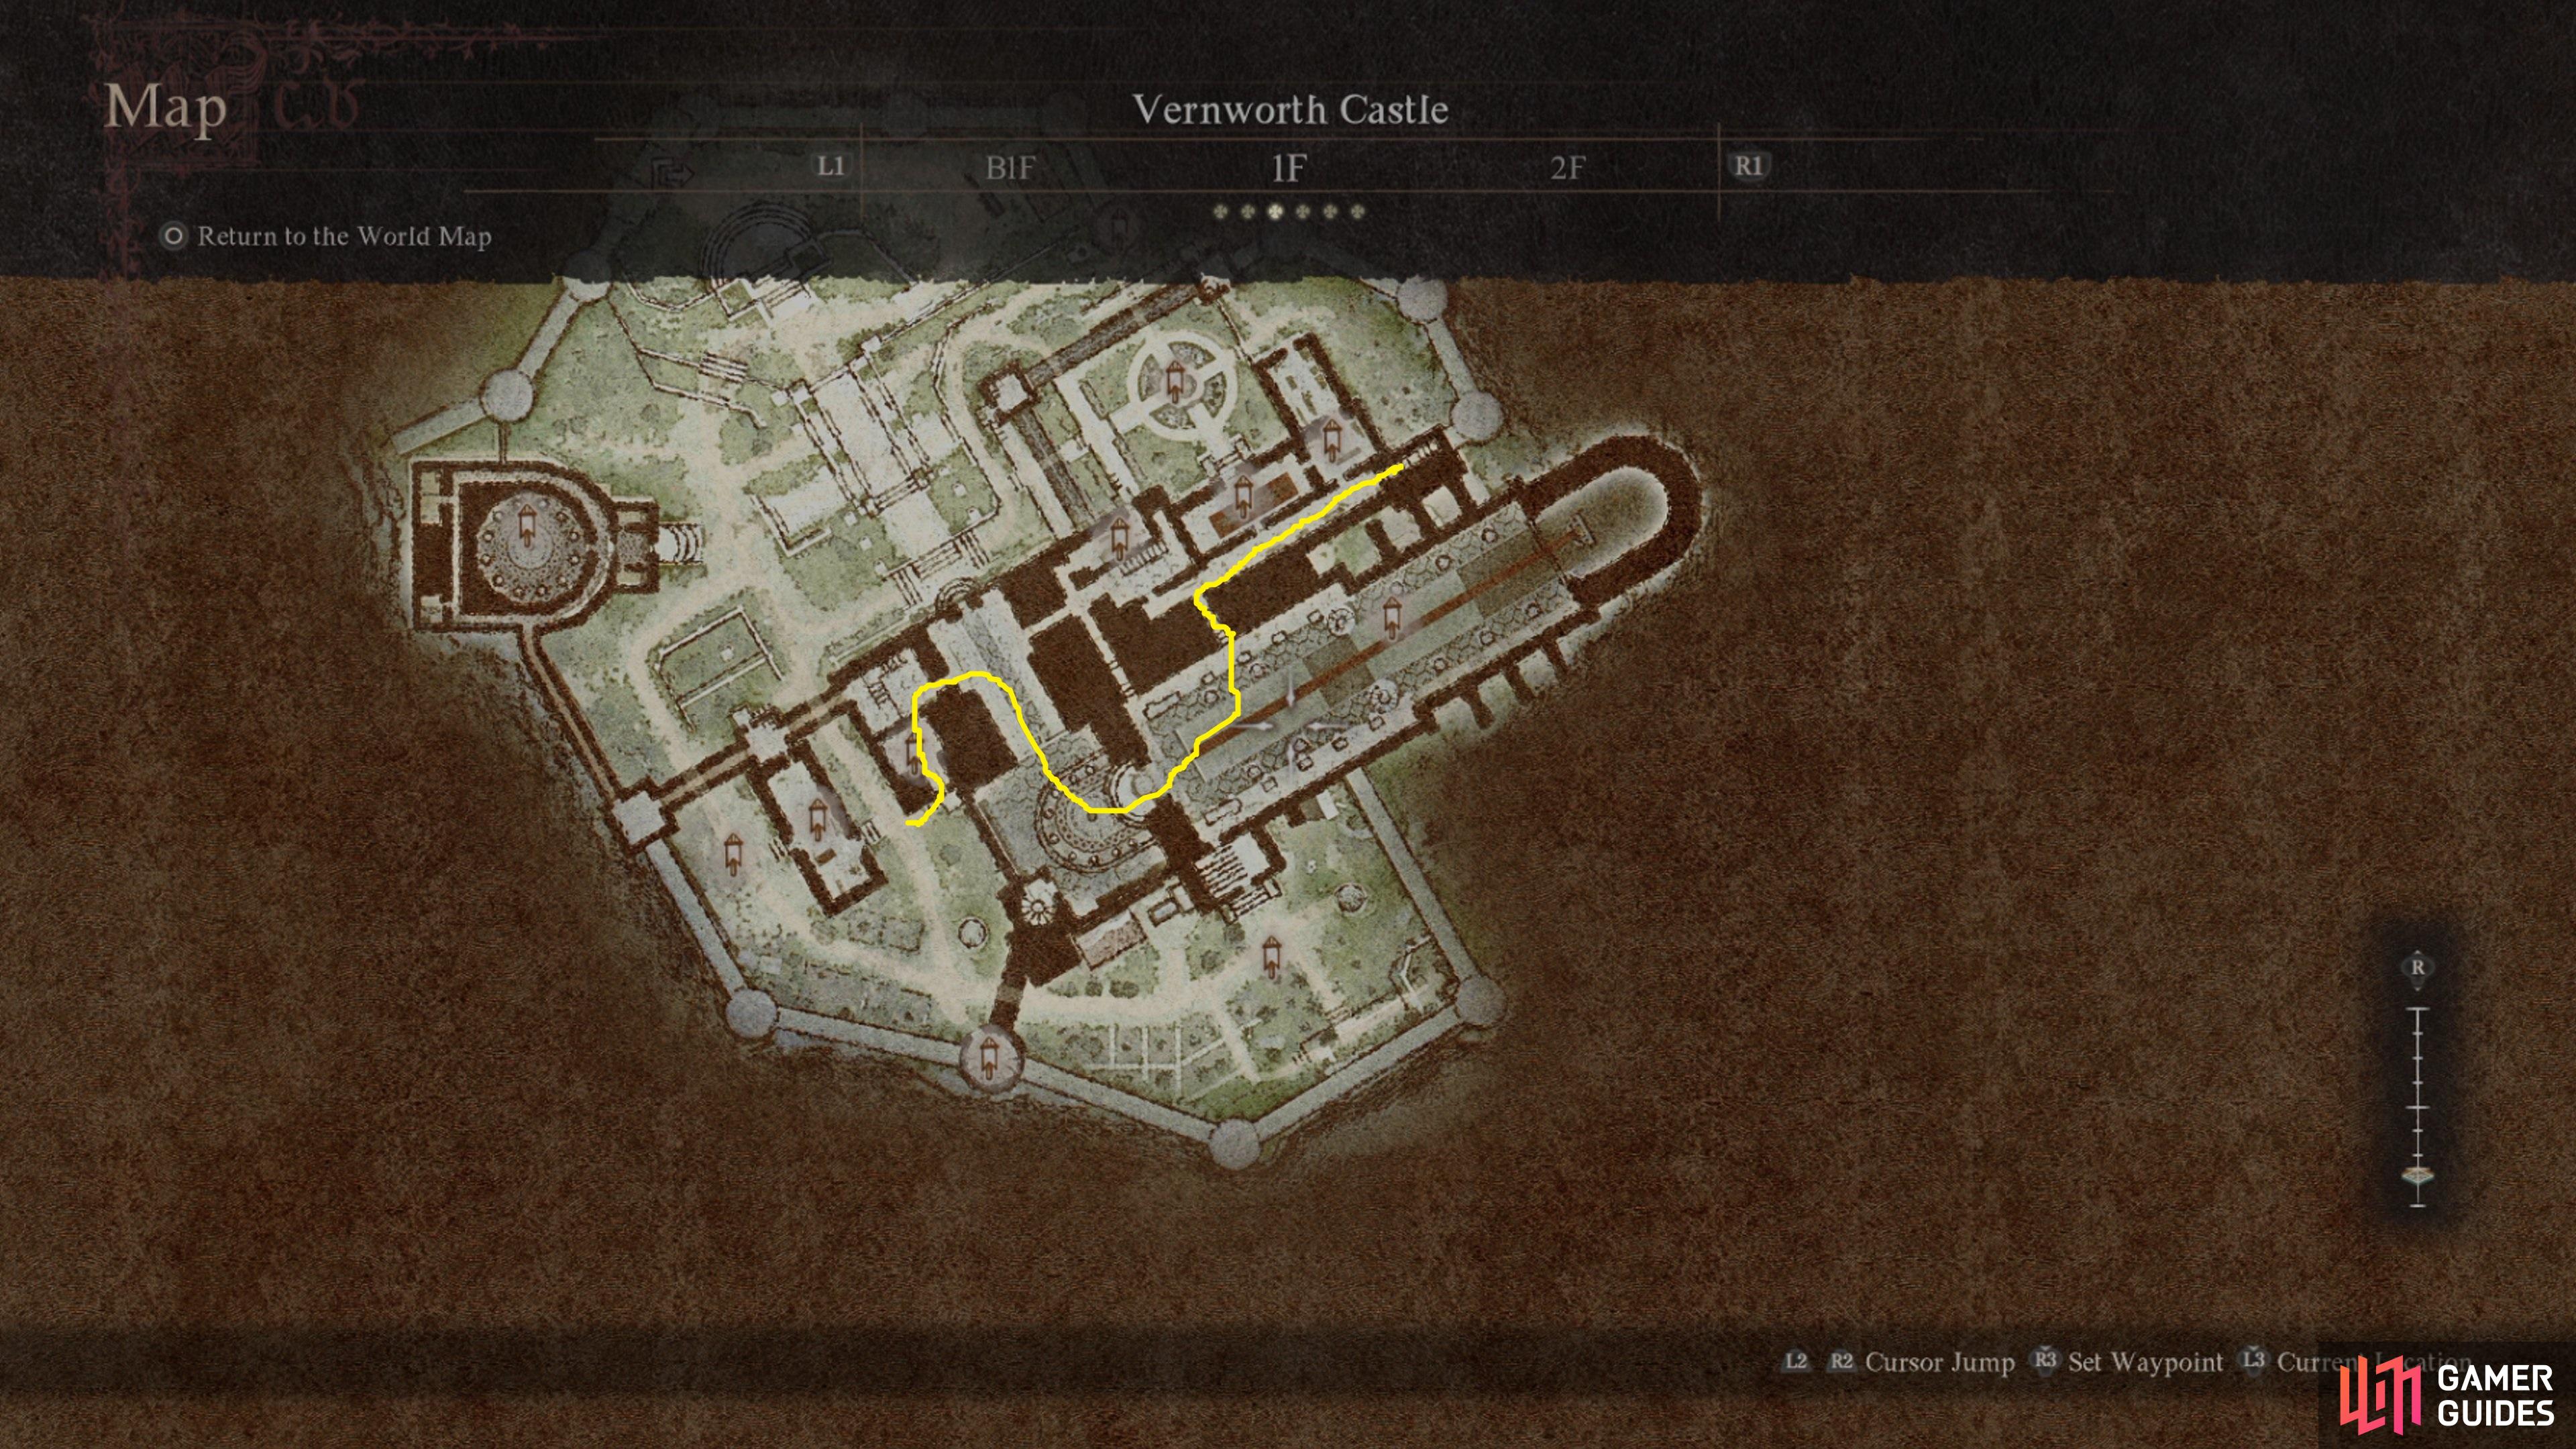 Follow this path through the Guardhouse to easily find the vault.